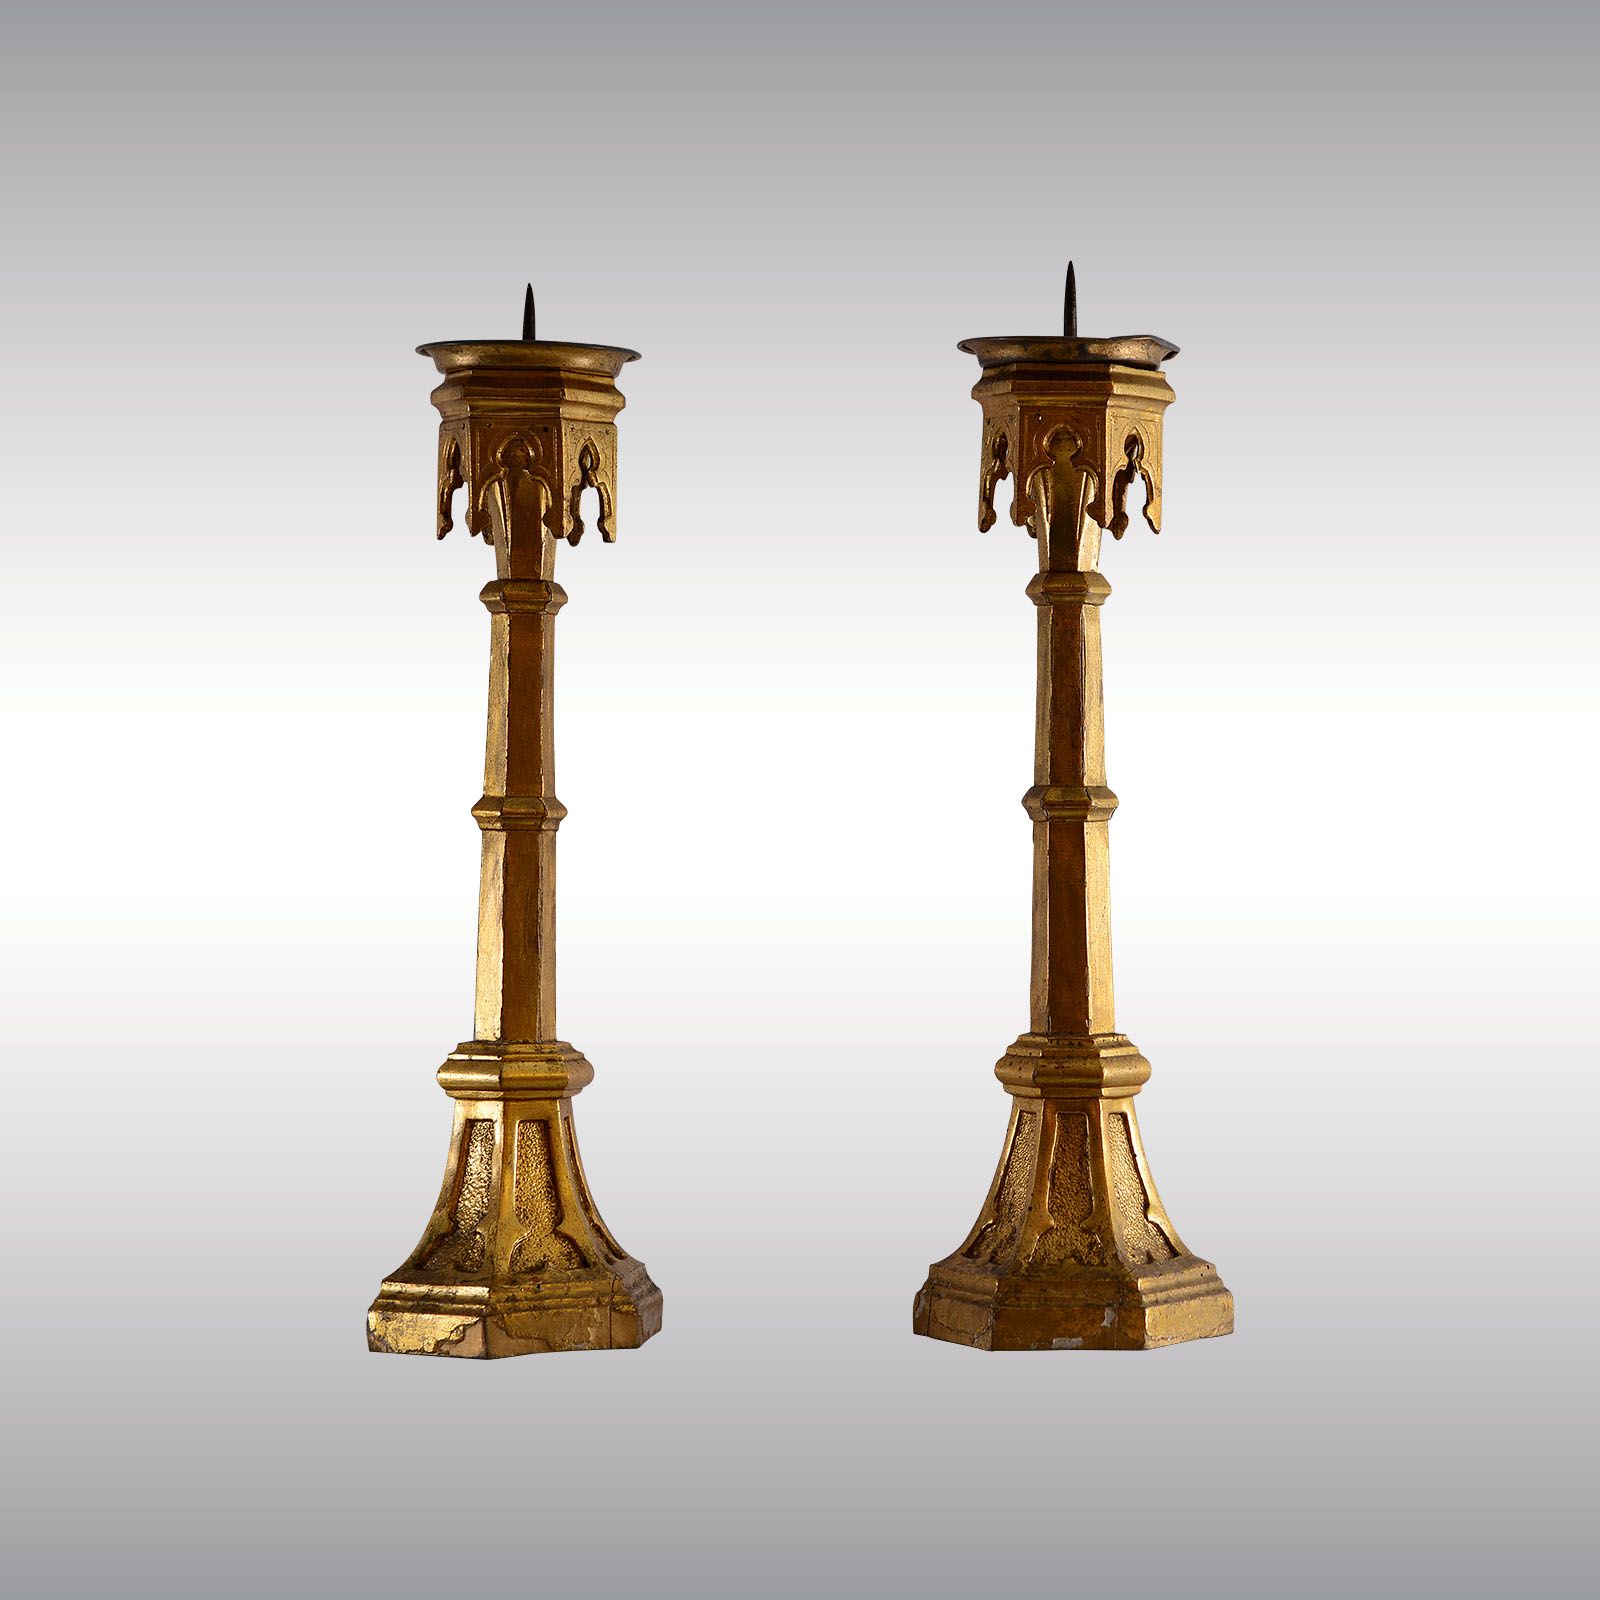 WOKA LAMPS VIENNA - OrderNr.:  80036|Candle Holder Limewood Gothic Style